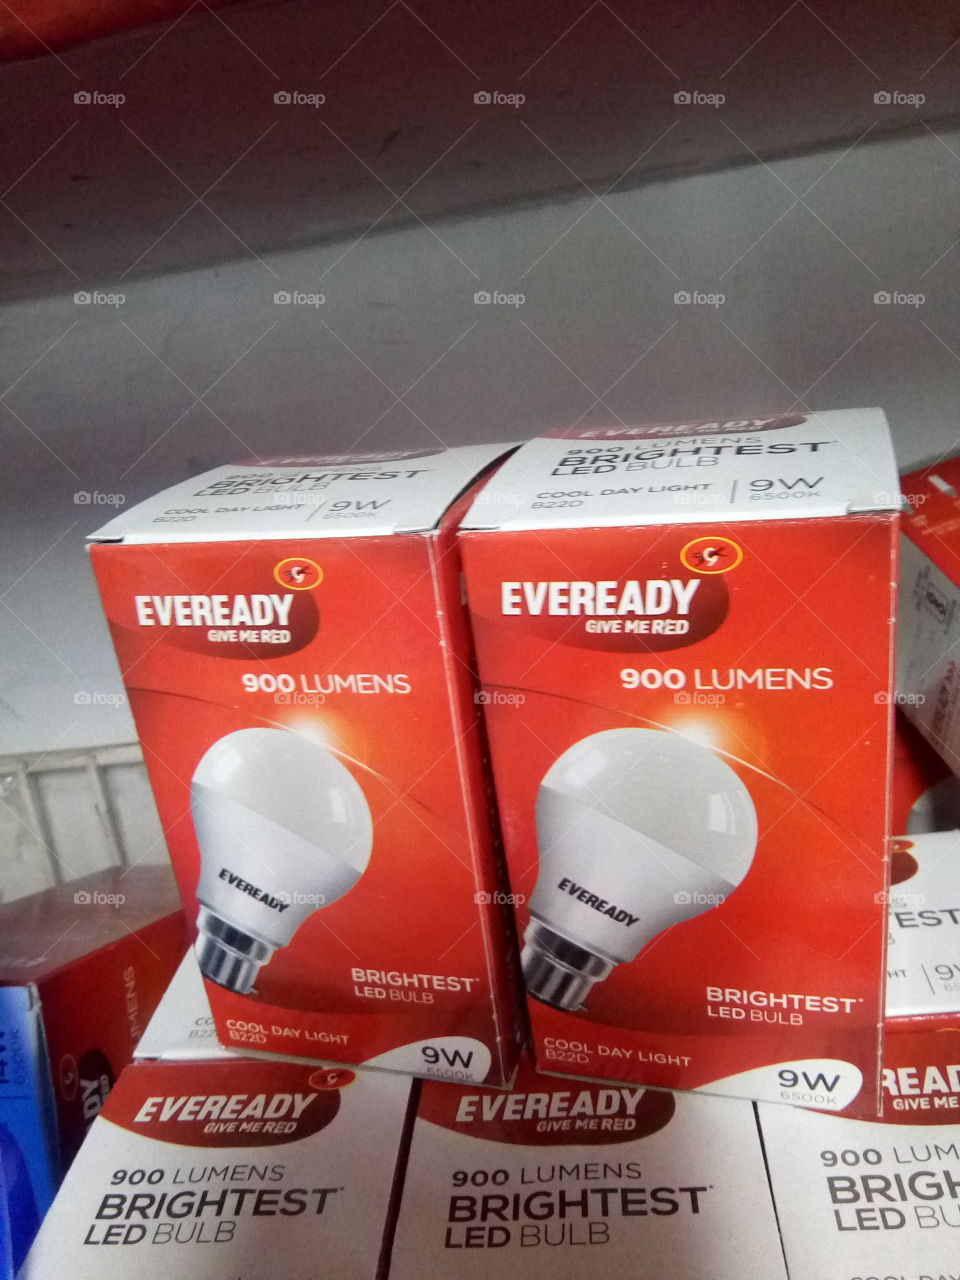 instal LED BULB in your house and save energy.